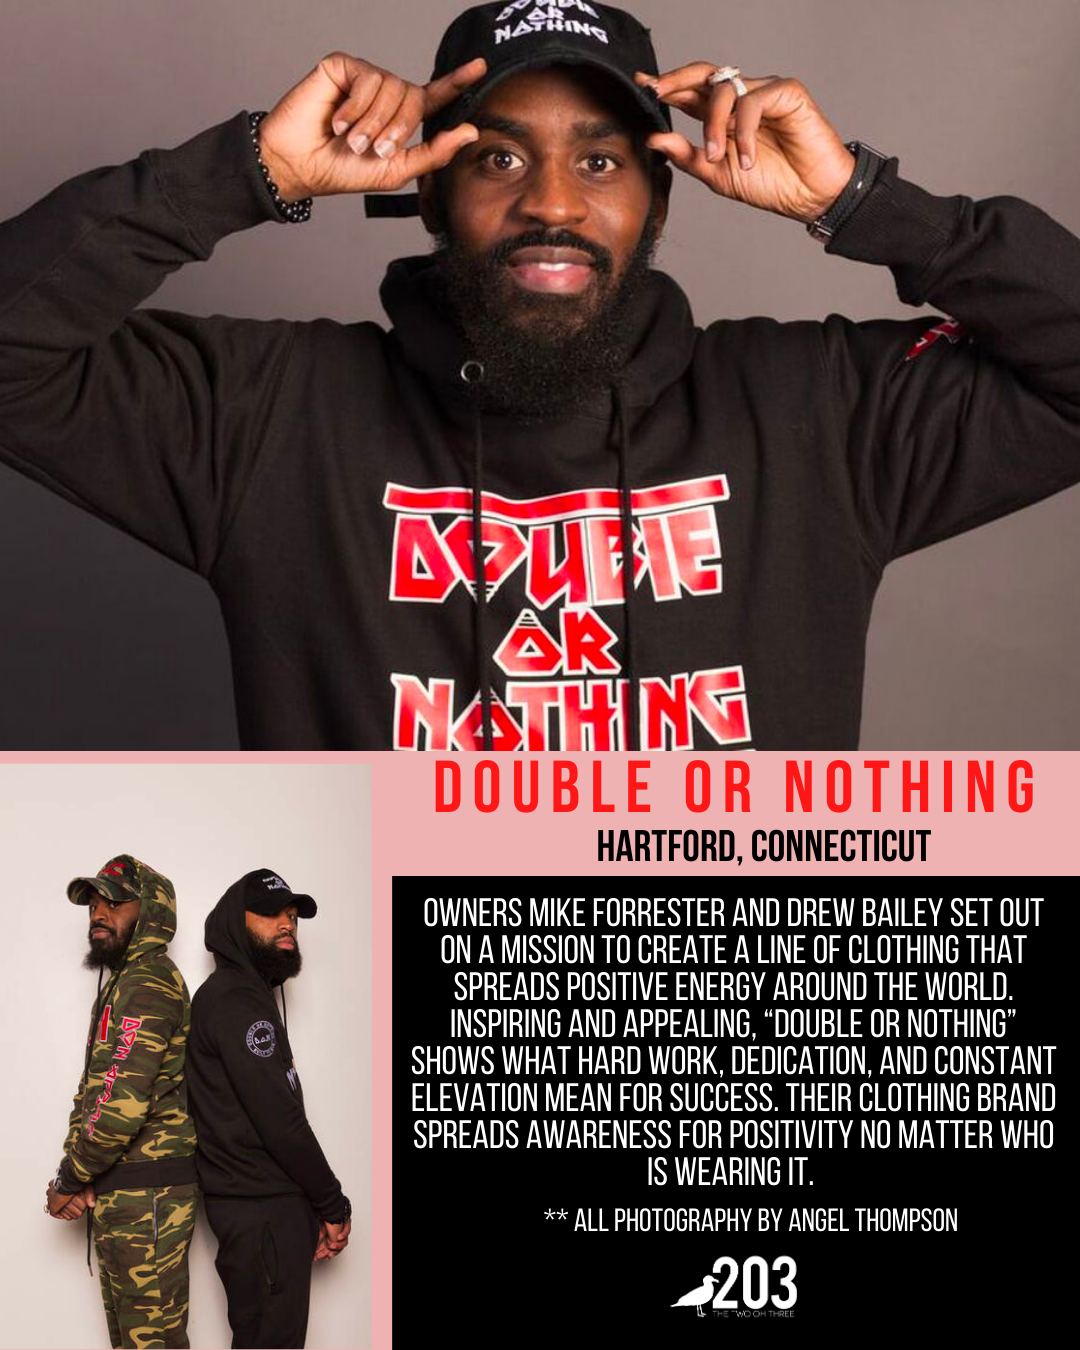 CT Black Owned Businesses: Double or Nothing